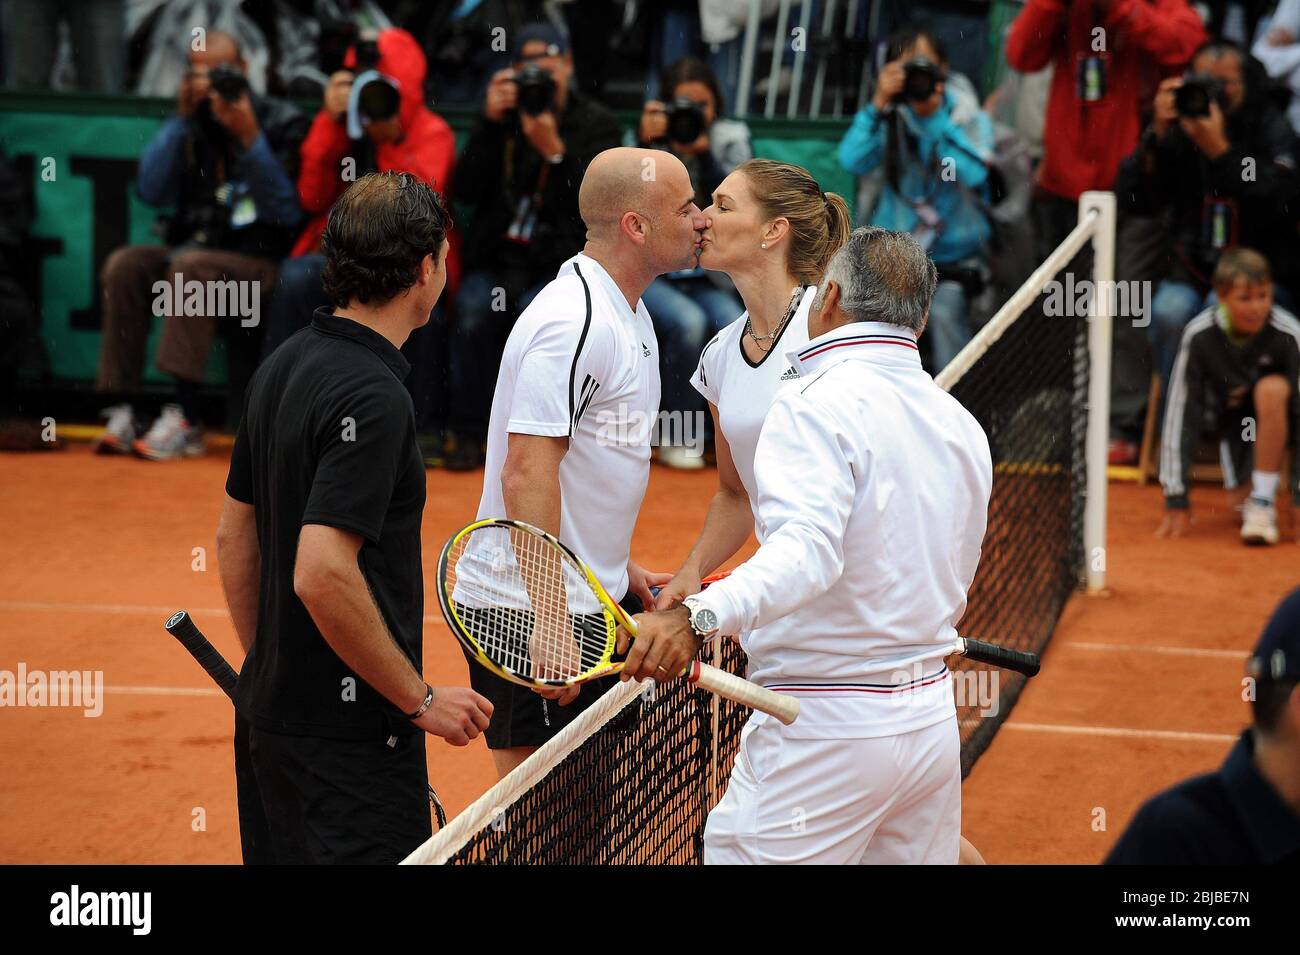 Paris, Frankreich. 06th June, 2009. firo Tennis, French Open Roland GARROS, Paris: 06.06.2009 women, women, Andre AGASSI and Steffi GRAF, kiss, kiss, kiss Copyright by firo sportphoto: Credit: icon sport, only for use in GERMANY !!! Our general terms and conditions apply, which can be viewed at www.firosportphoto.de Pfefferackerstr. 2a 45894 G elsenkirchen www.firosportphoto.de mail@firosportphoto.de (V olksbank B ochum W itten) BLZ .: 430 601 29 Ct.No .: 341 117 100 Tel: 0209 - 9304402 Fax: 0209 - 9304443 | usage worldwide/dpa/Alamy Live News Stock Photo